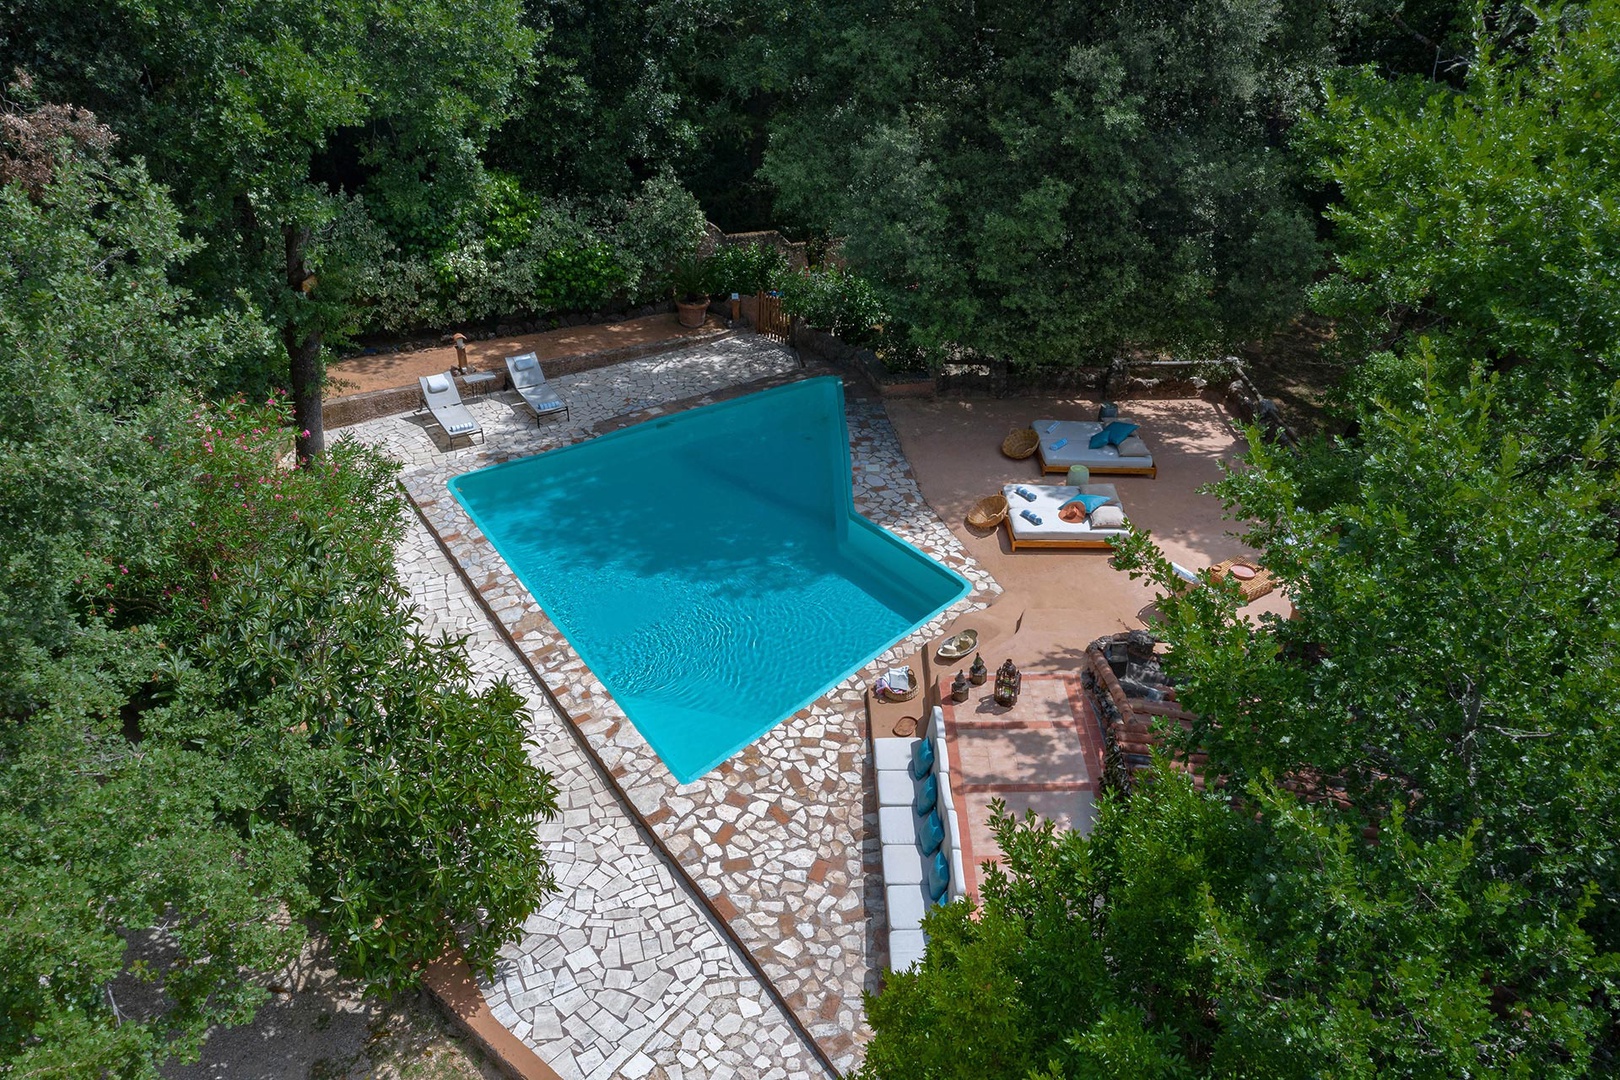 Enjoy the large pool area with family and friends.